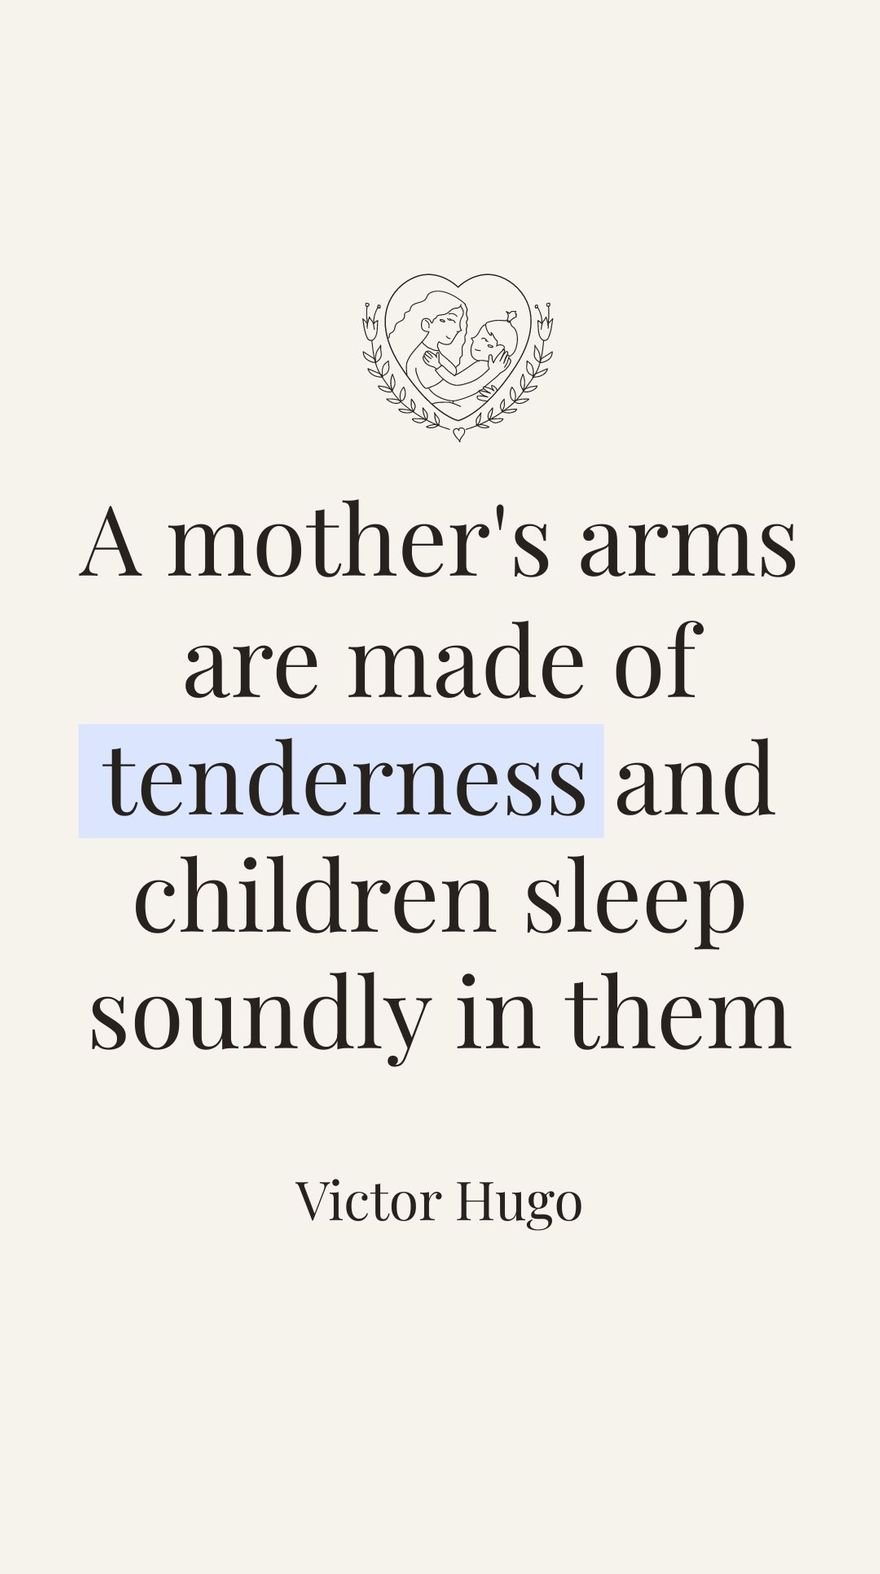 Free Victor Hugo - A mother's arms are made of tenderness and children sleep soundly in them. in JPG